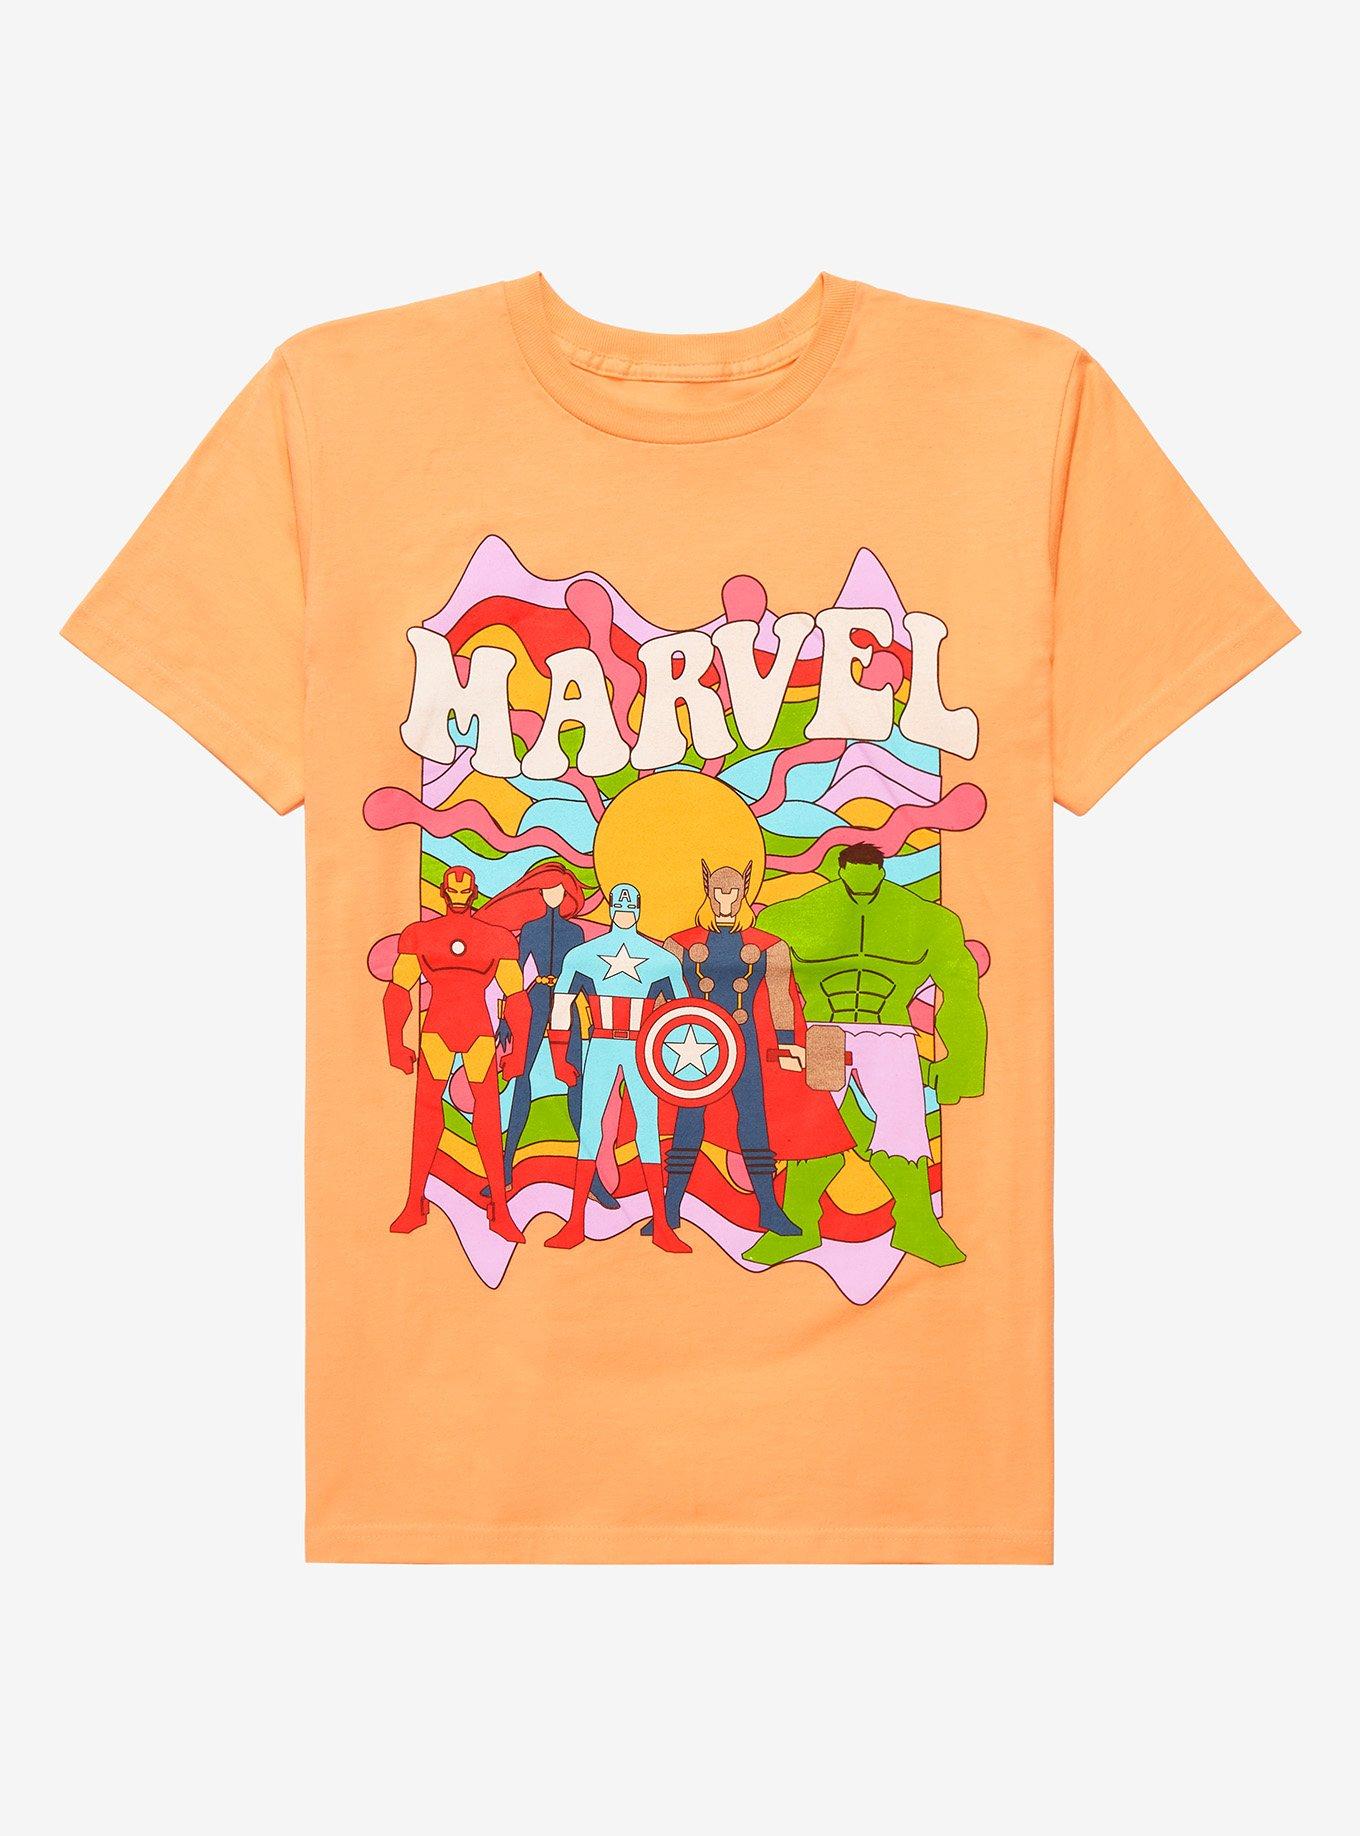 BoxLunch Exclusive T-Shirt Marvel - BoxLunch Women\'s Groovy Avengers |